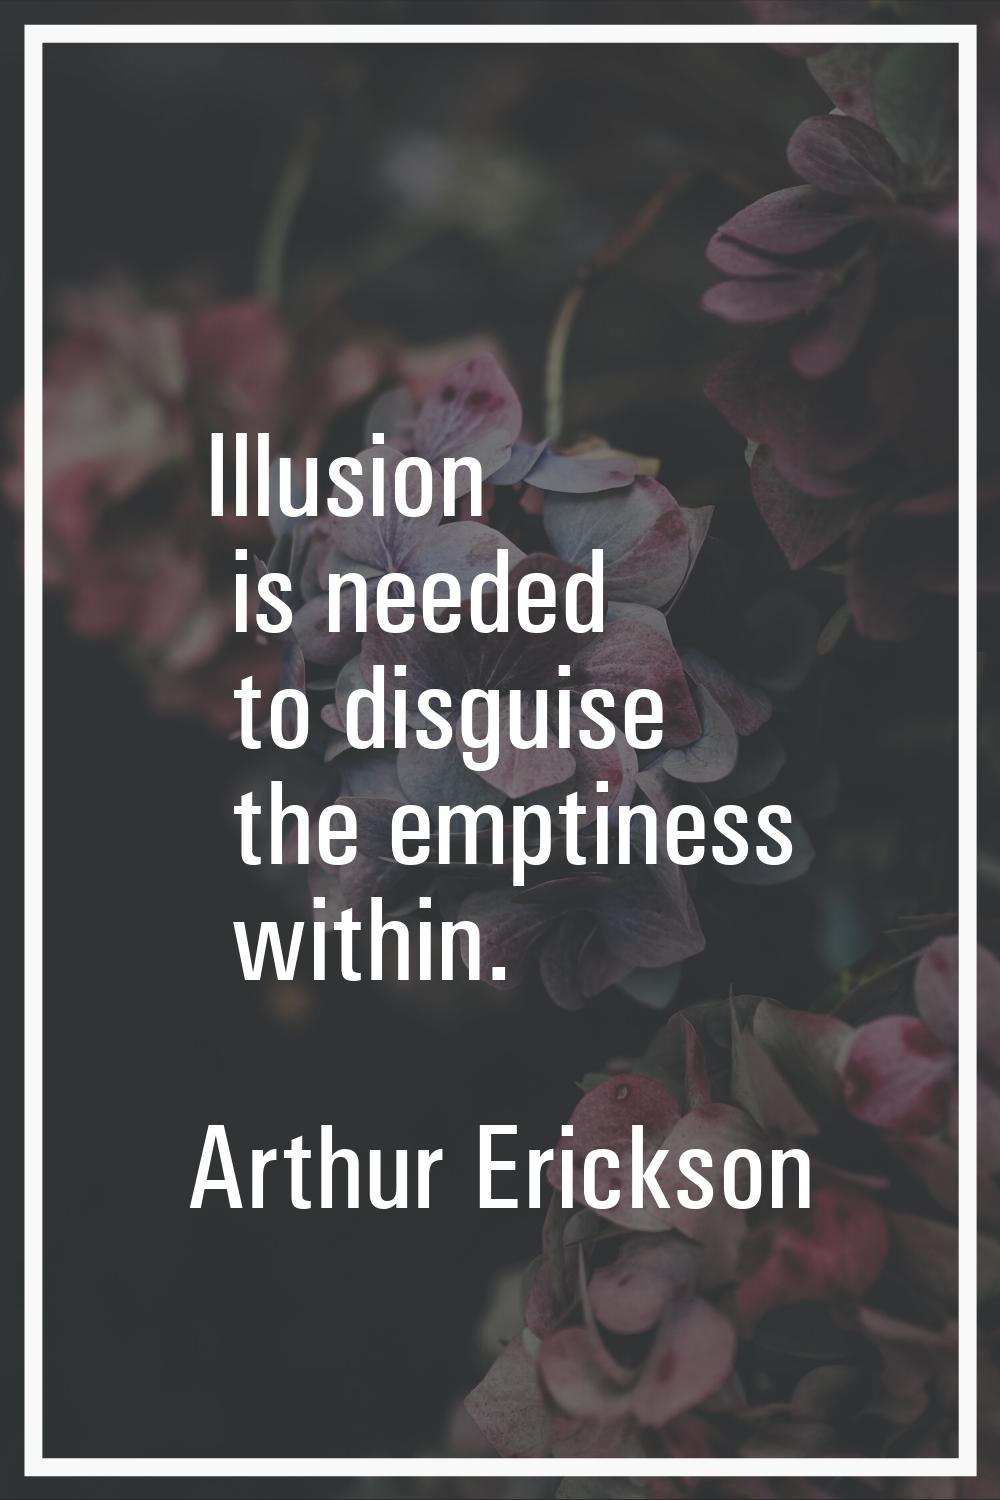 Illusion is needed to disguise the emptiness within.